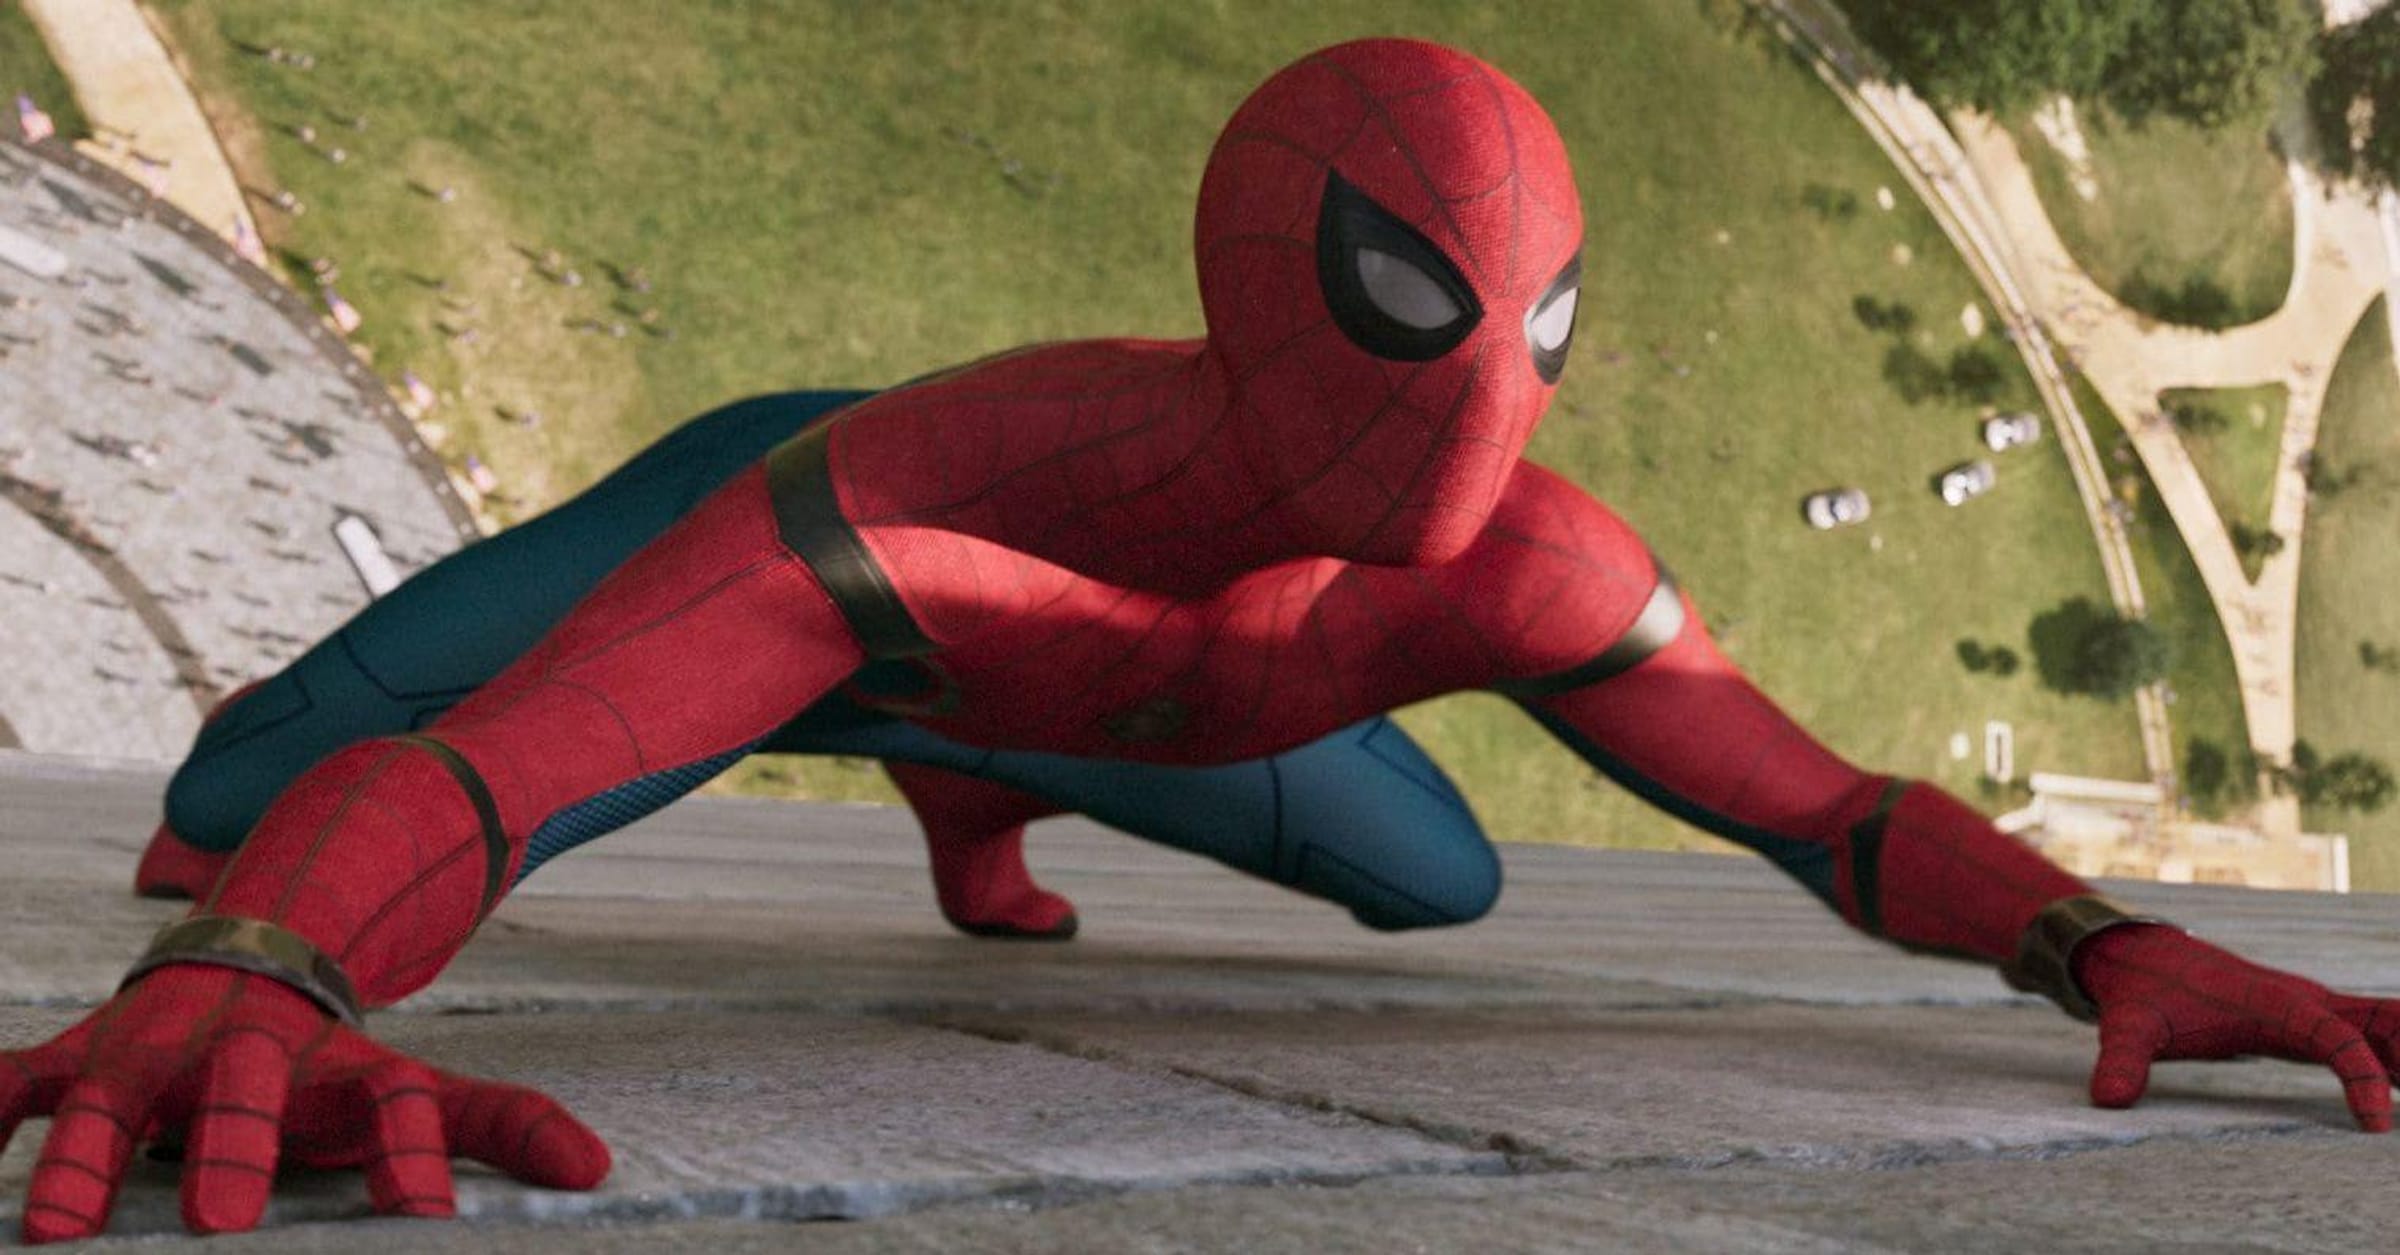 Spider-Man: Far From Home / Spider-Man: Homecoming / Spider-Man